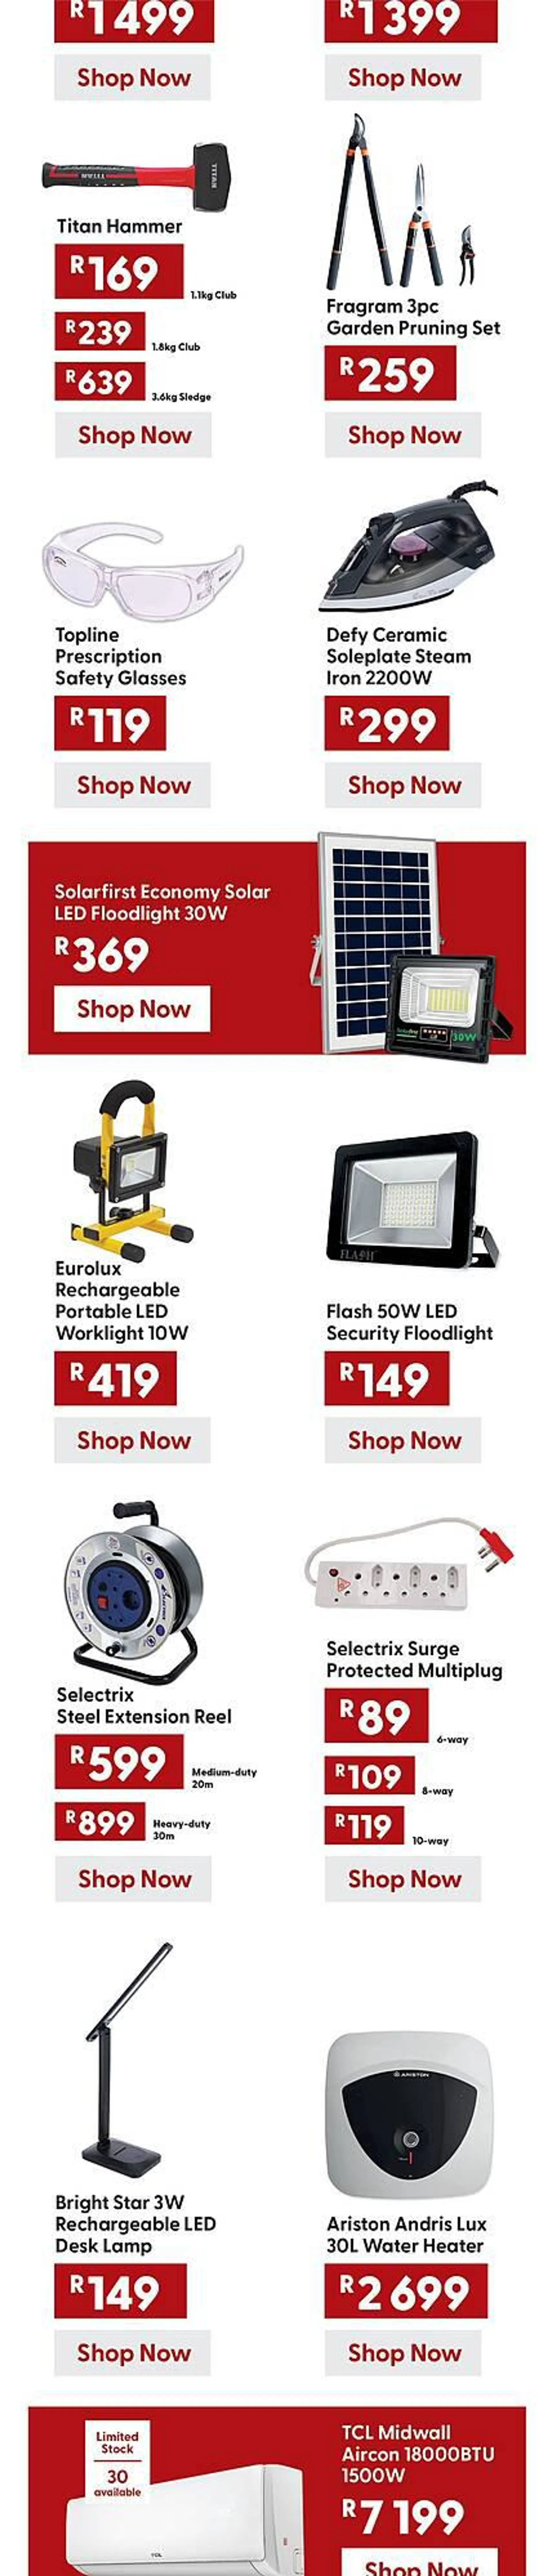 Brights Hardware catalogue - 15 January 3 March 2024 - Page 2